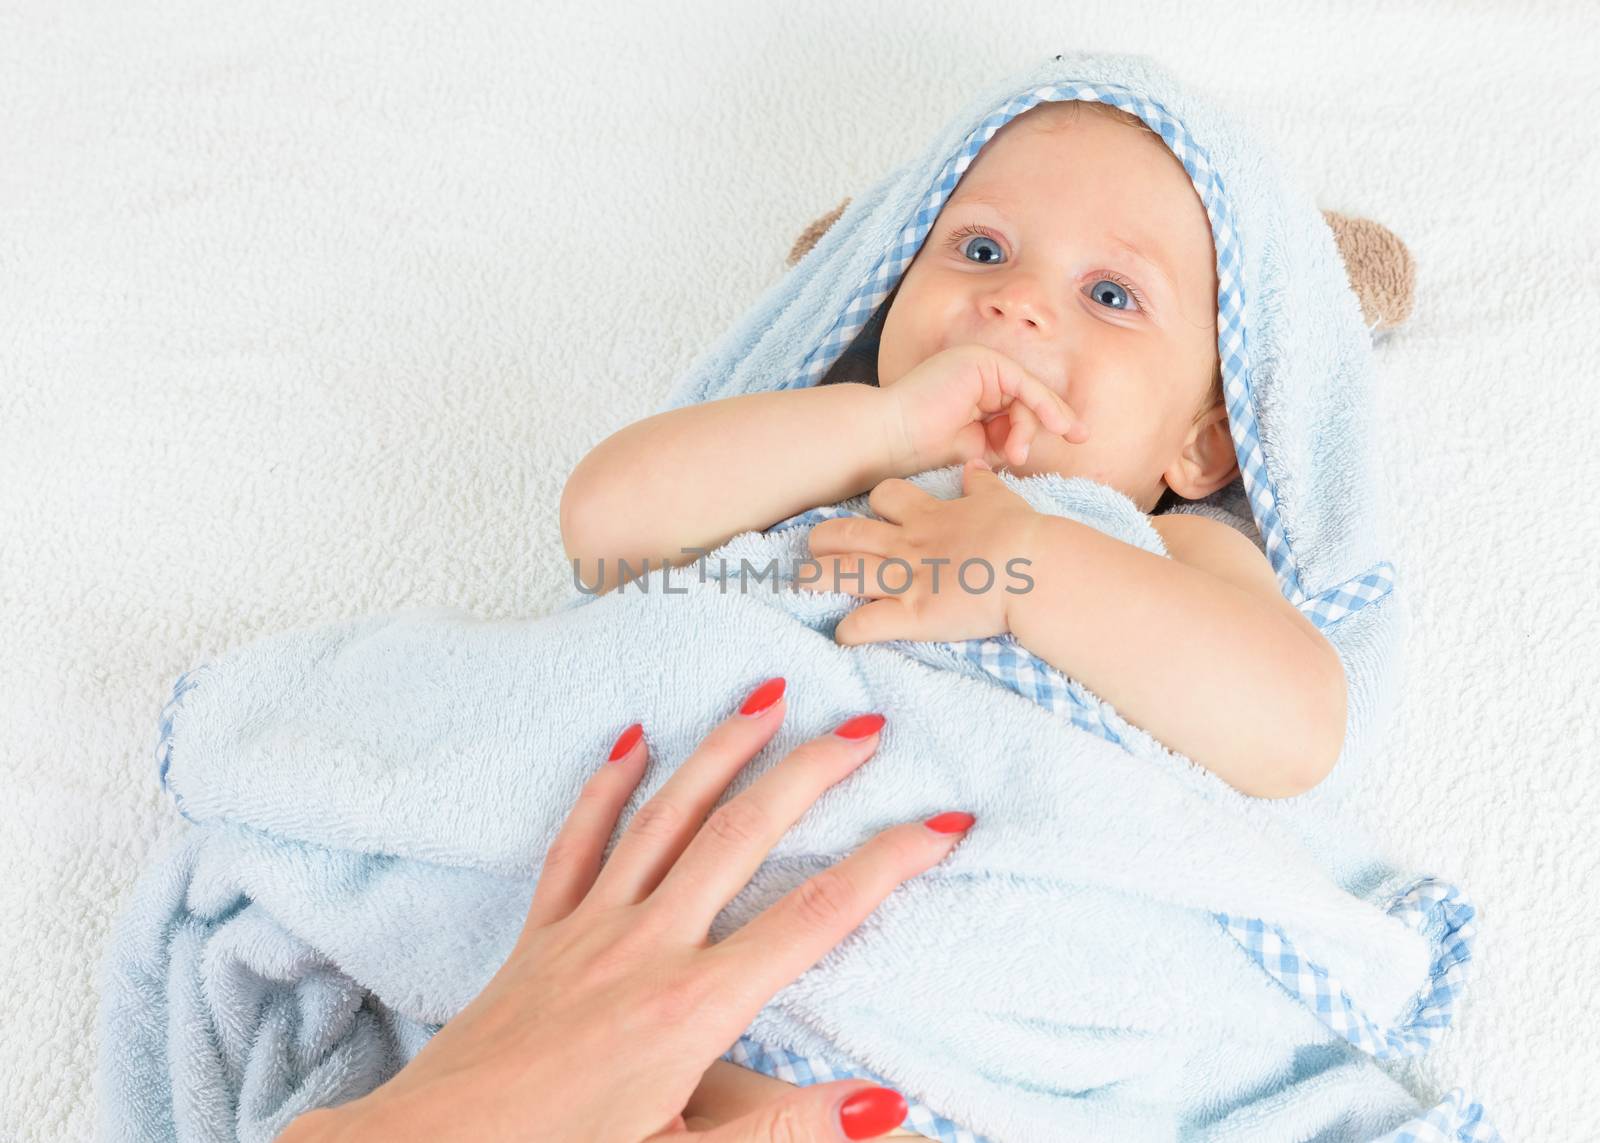 Cute happy beautiful smiling playful child boy with wet hair sitting in hothouse bath light blue fluffy towel white background, horizontal photo.